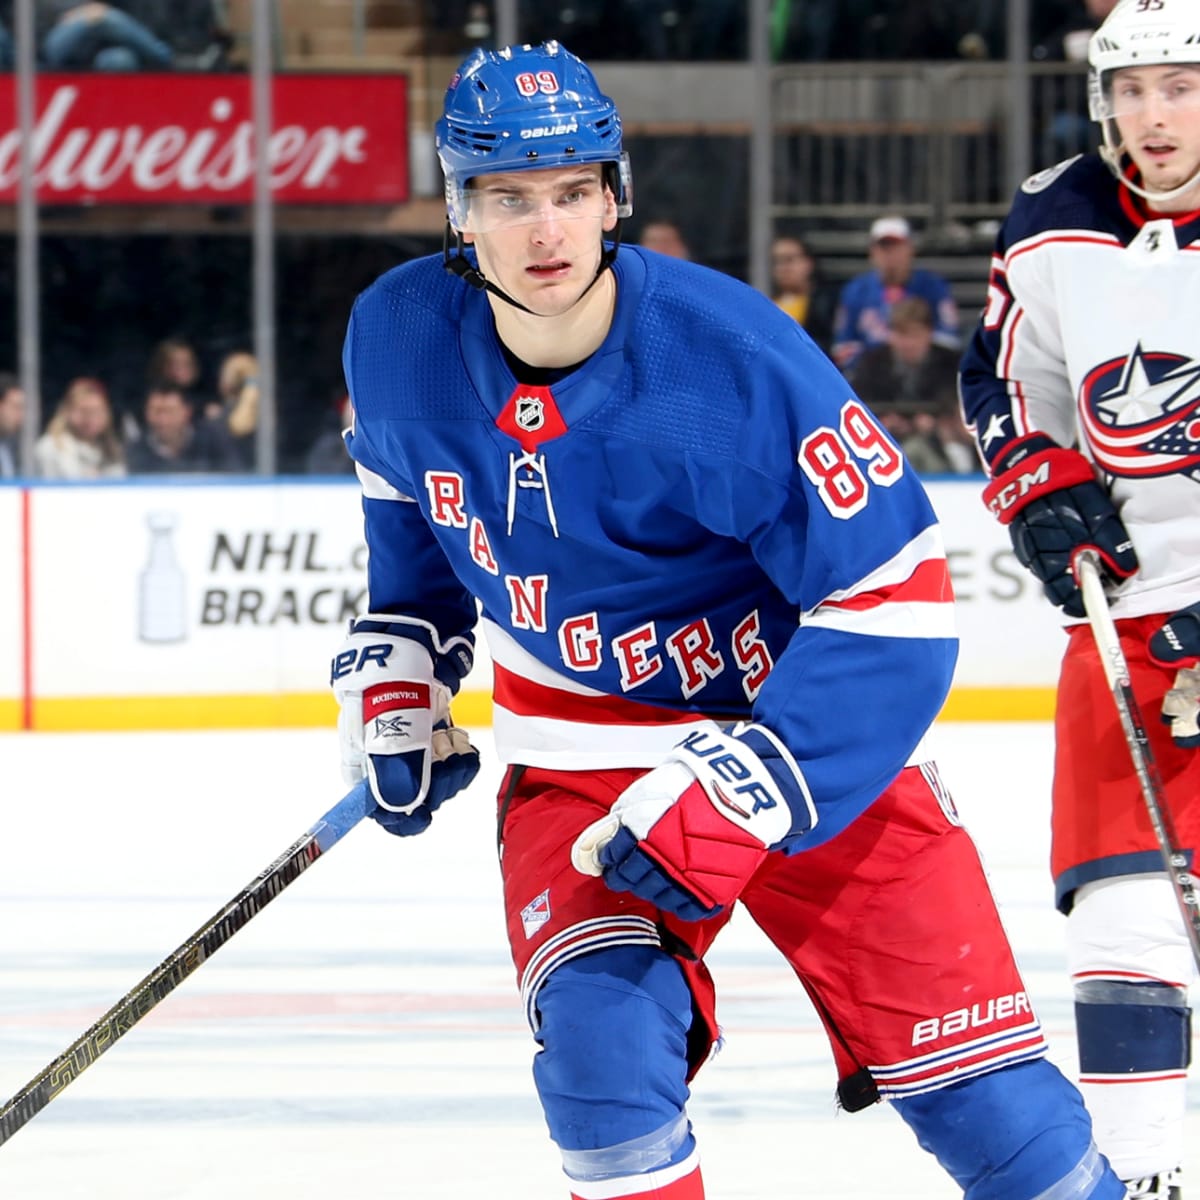 Young Rangers fan overwhelmed after Pavel Buchnevich gave him his